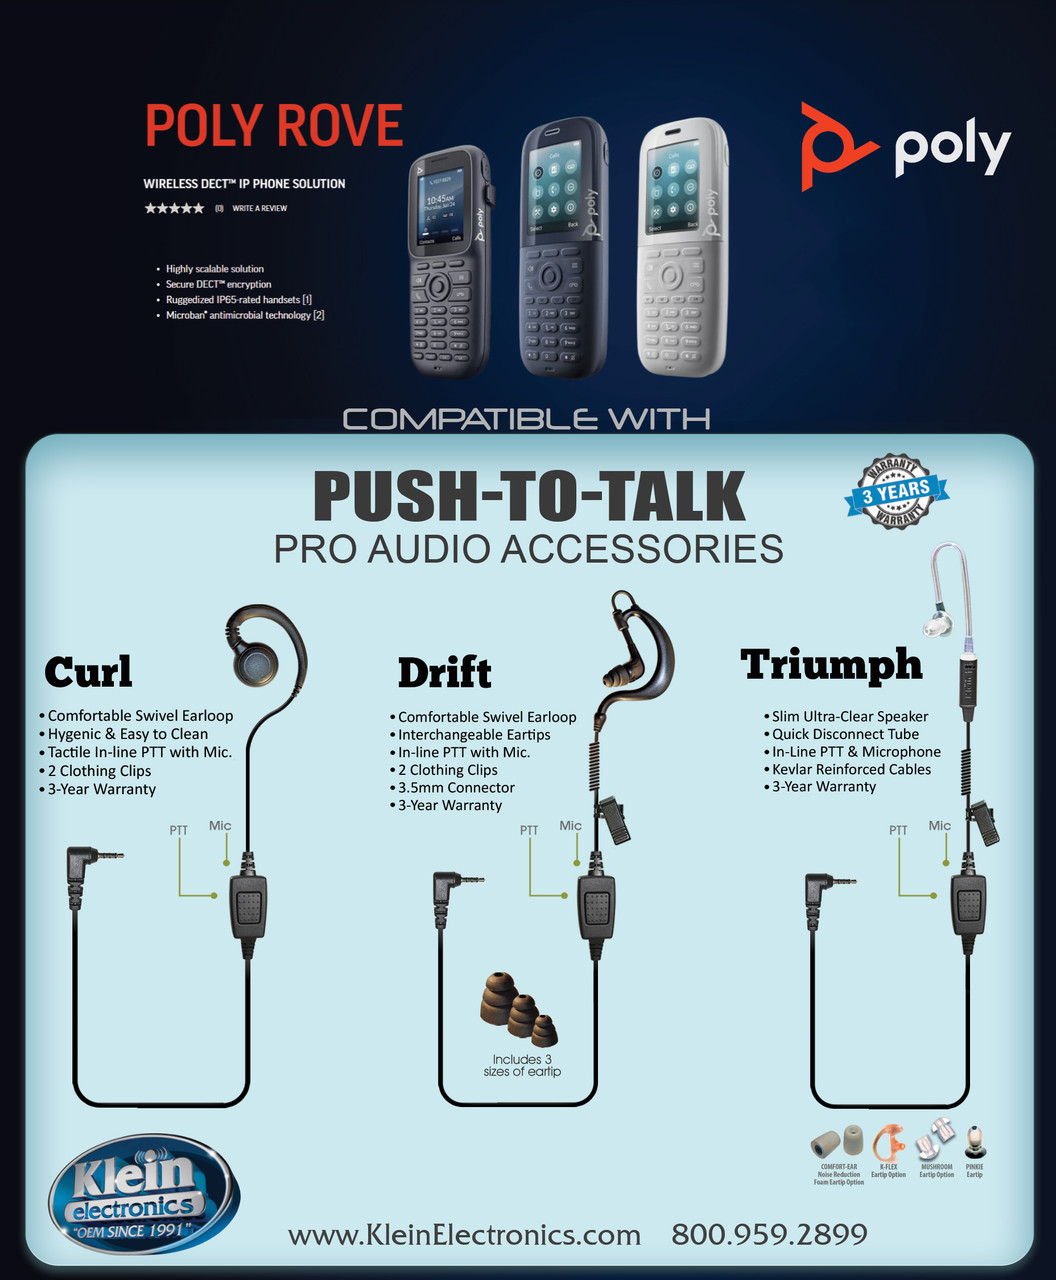 DRIFT Single-Wire PTT Earpiece (3.5mm connector) - Poly Rove [[product_type]] kleinelectronics.com 54.95